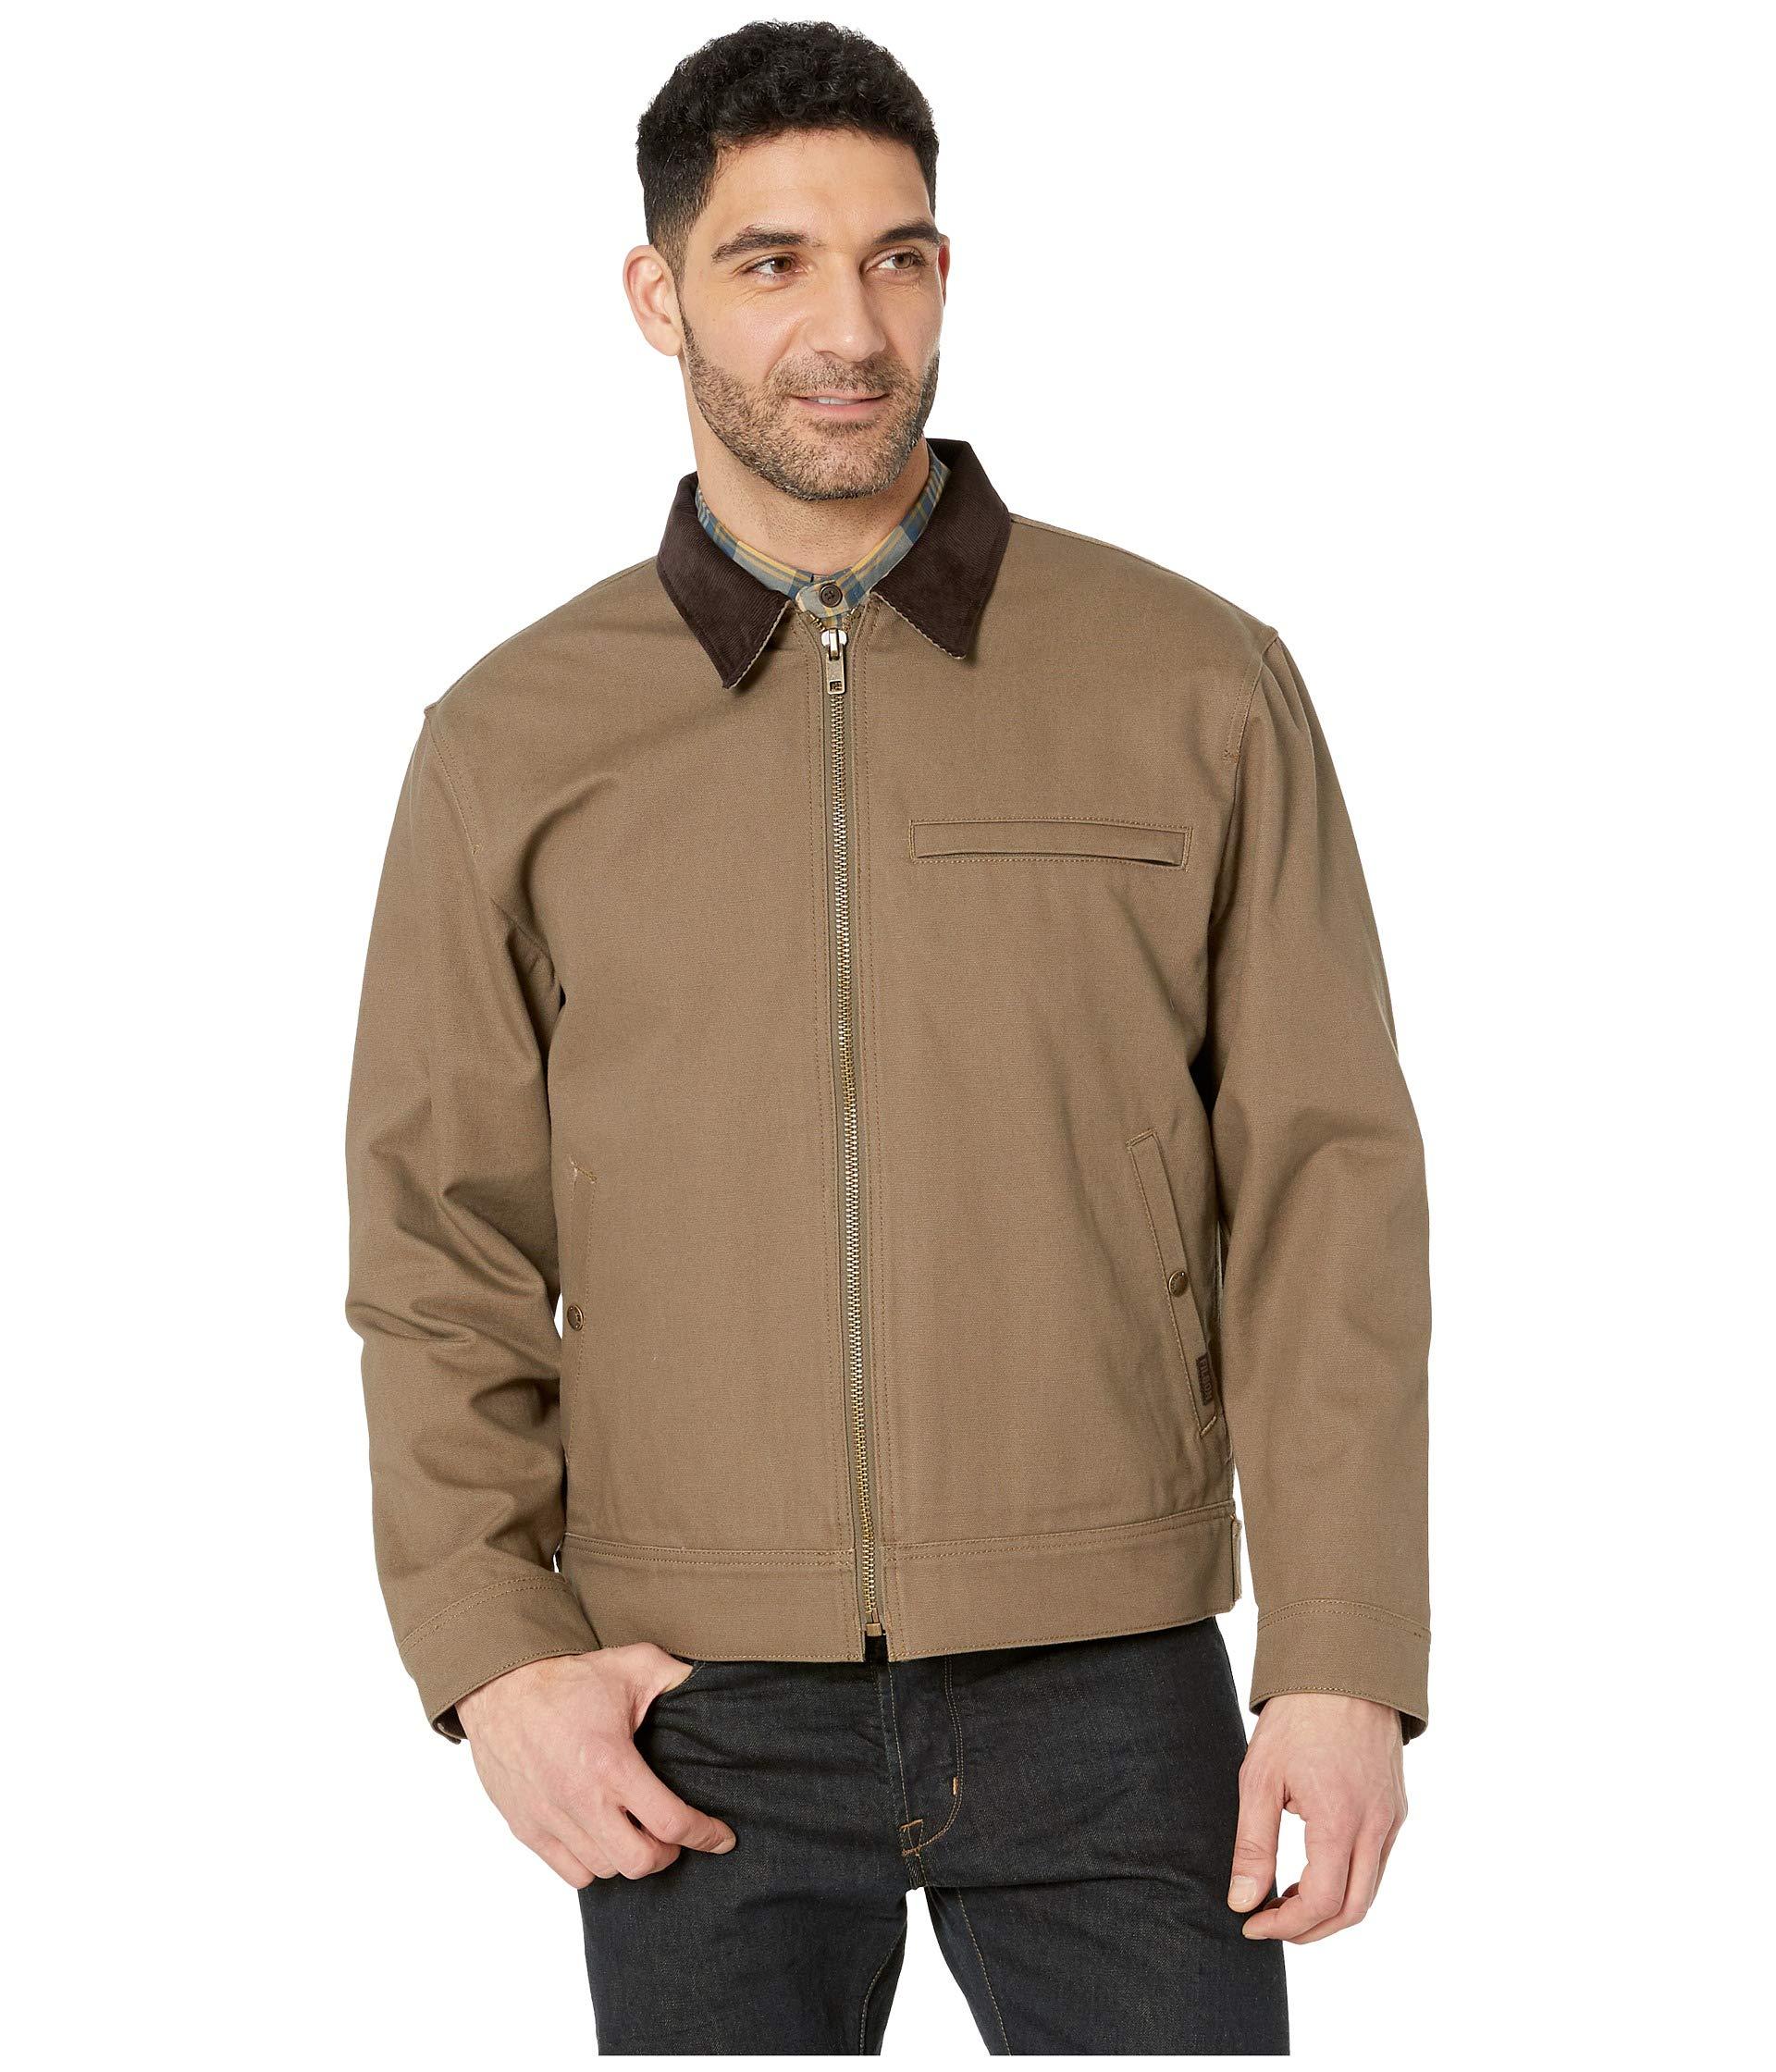 Filson Cotton Tacoma Work Jacket in Gray for Men - Lyst